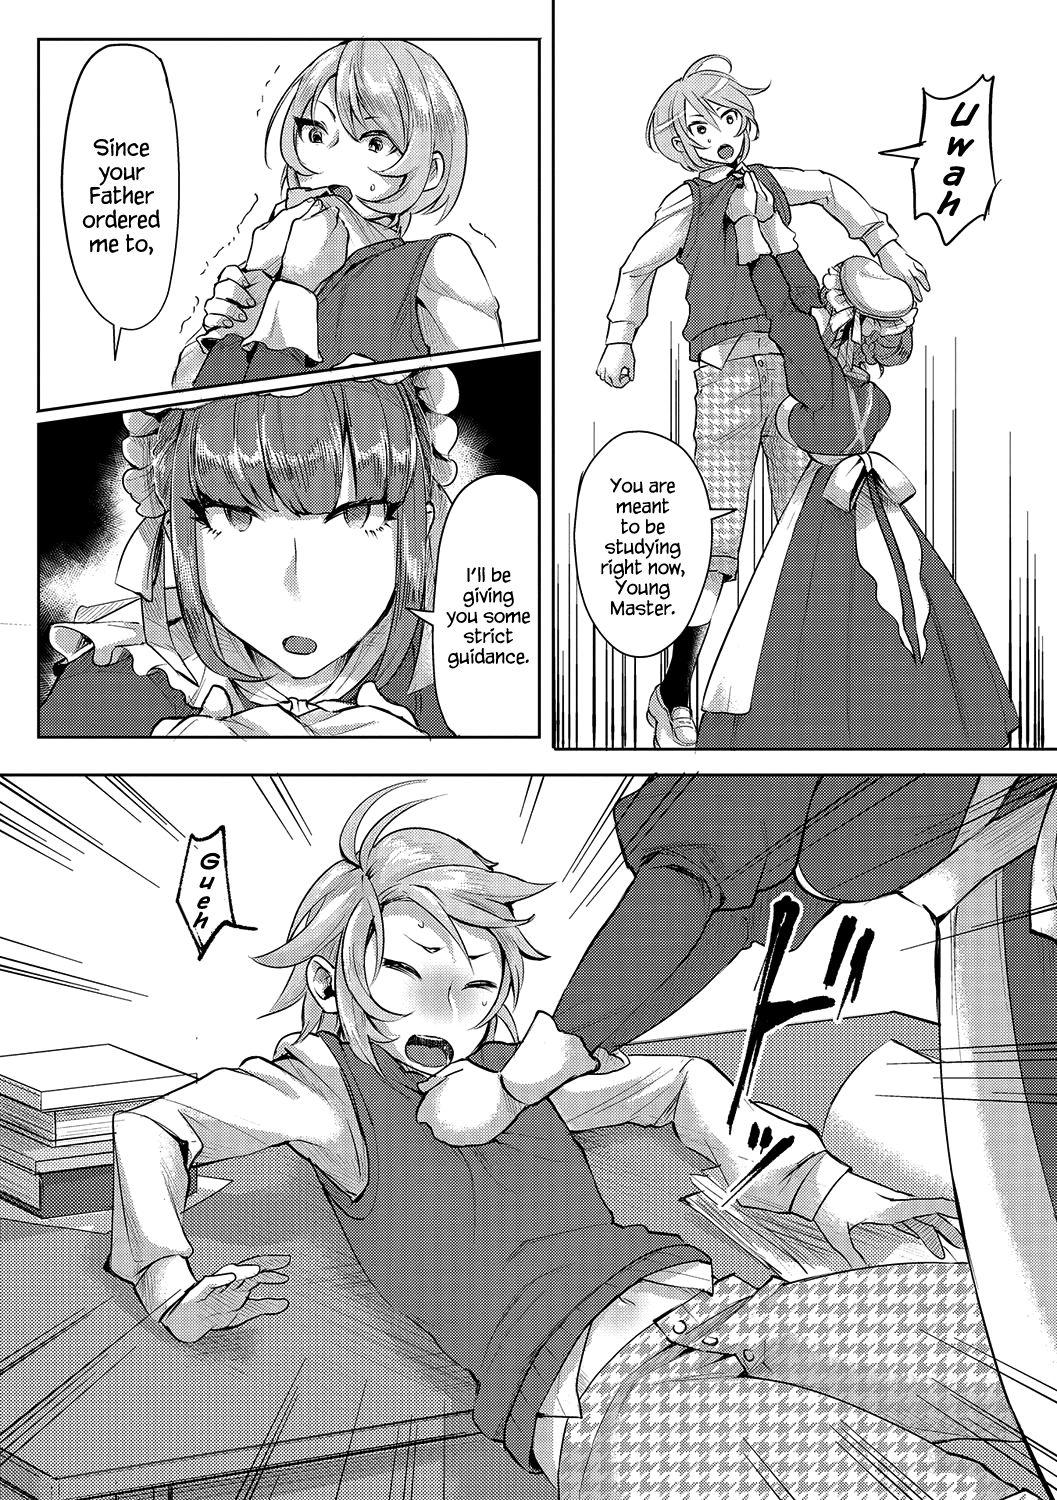 Stockings Bocchama no Aibou Maid | The Young Master’s Partner Maid Teen Hardcore - Page 4